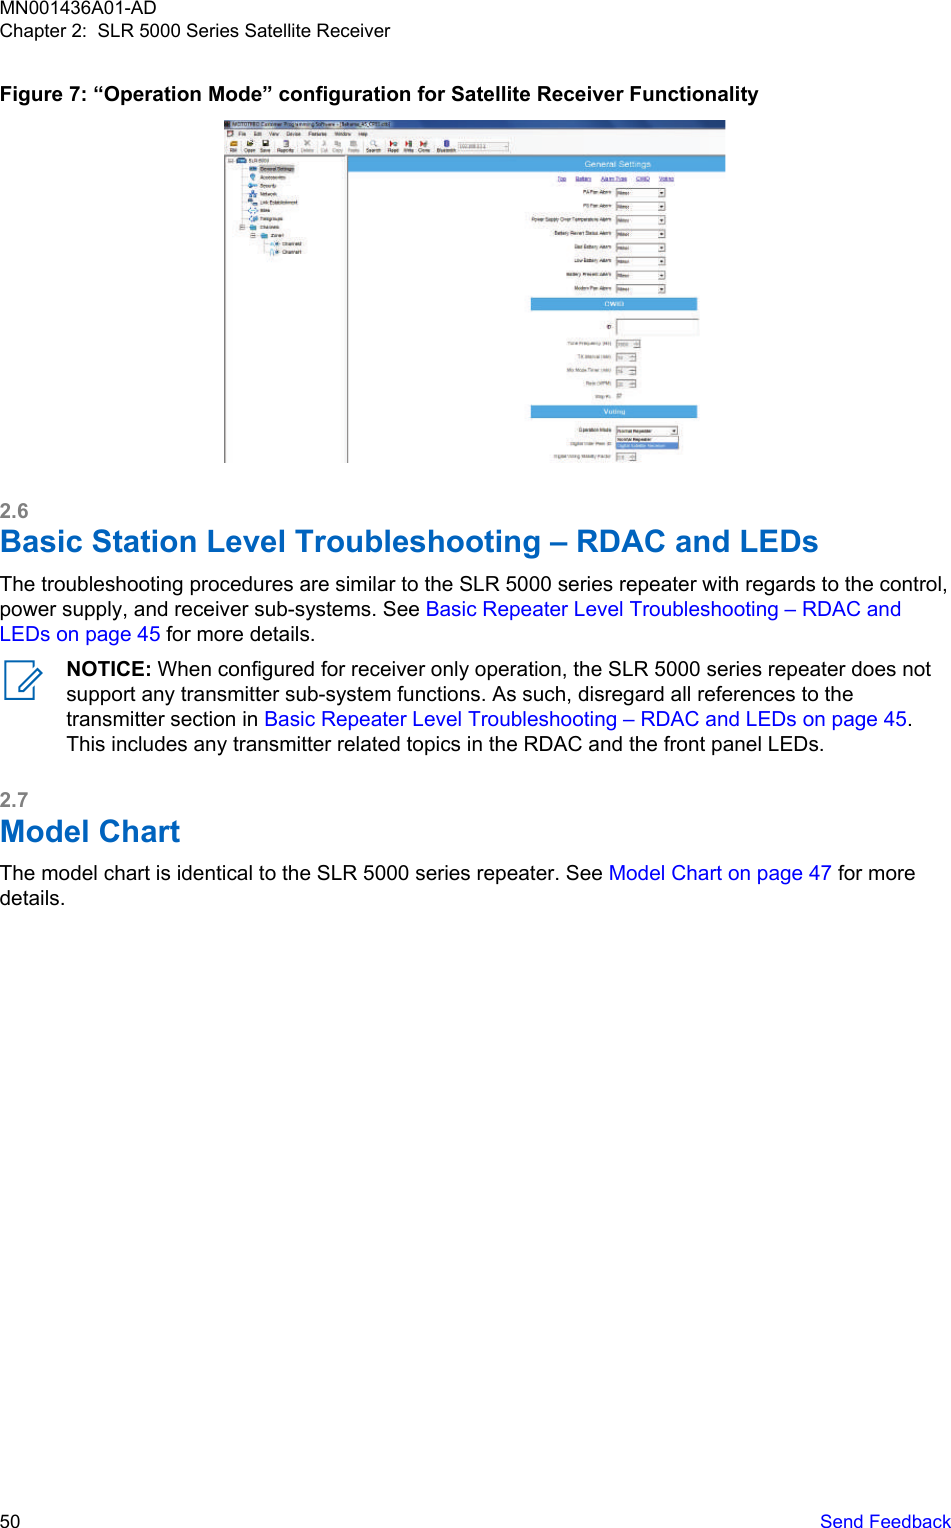 Figure 7: “Operation Mode” configuration for Satellite Receiver Functionality2.6Basic Station Level Troubleshooting – RDAC and LEDsThe troubleshooting procedures are similar to the SLR 5000 series repeater with regards to the control,power supply, and receiver sub-systems. See Basic Repeater Level Troubleshooting – RDAC andLEDs on page 45 for more details.NOTICE: When configured for receiver only operation, the SLR 5000 series repeater does notsupport any transmitter sub-system functions. As such, disregard all references to thetransmitter section in Basic Repeater Level Troubleshooting – RDAC and LEDs on page 45.This includes any transmitter related topics in the RDAC and the front panel LEDs.2.7Model ChartThe model chart is identical to the SLR 5000 series repeater. See Model Chart on page 47 for moredetails.MN001436A01-ADChapter 2:  SLR 5000 Series Satellite Receiver50   Send Feedback